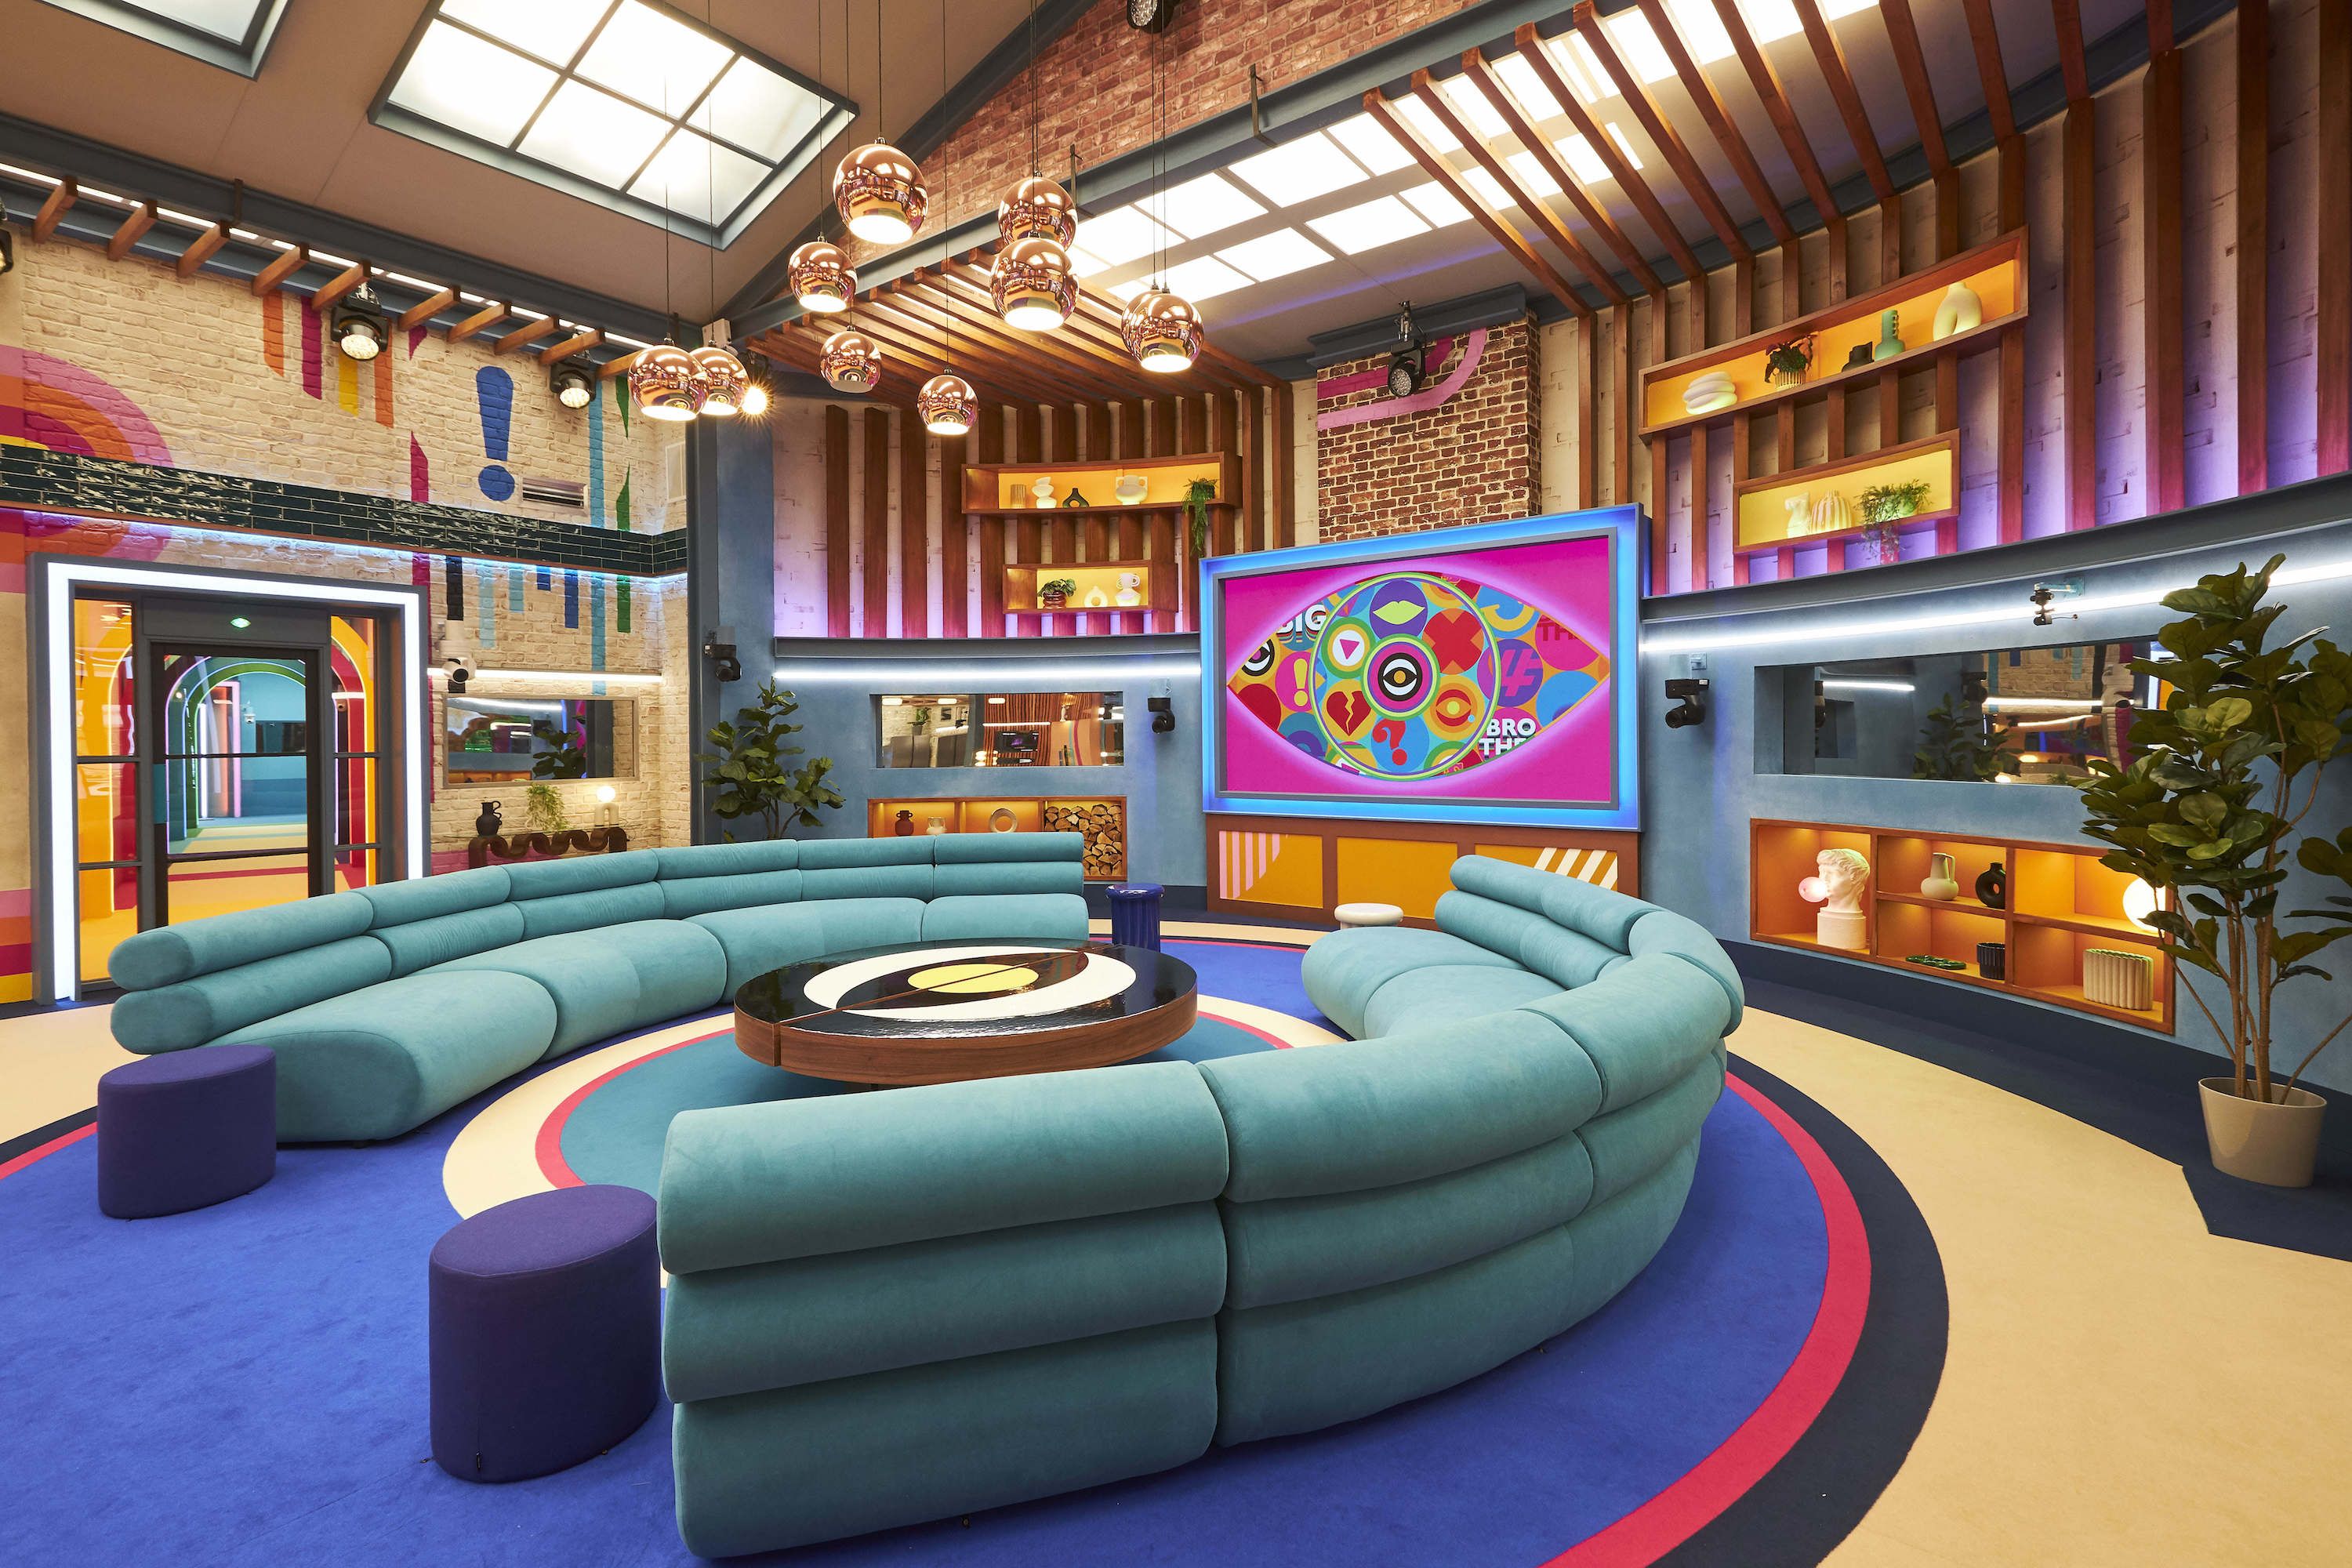 Tour the Big Brother house and garden